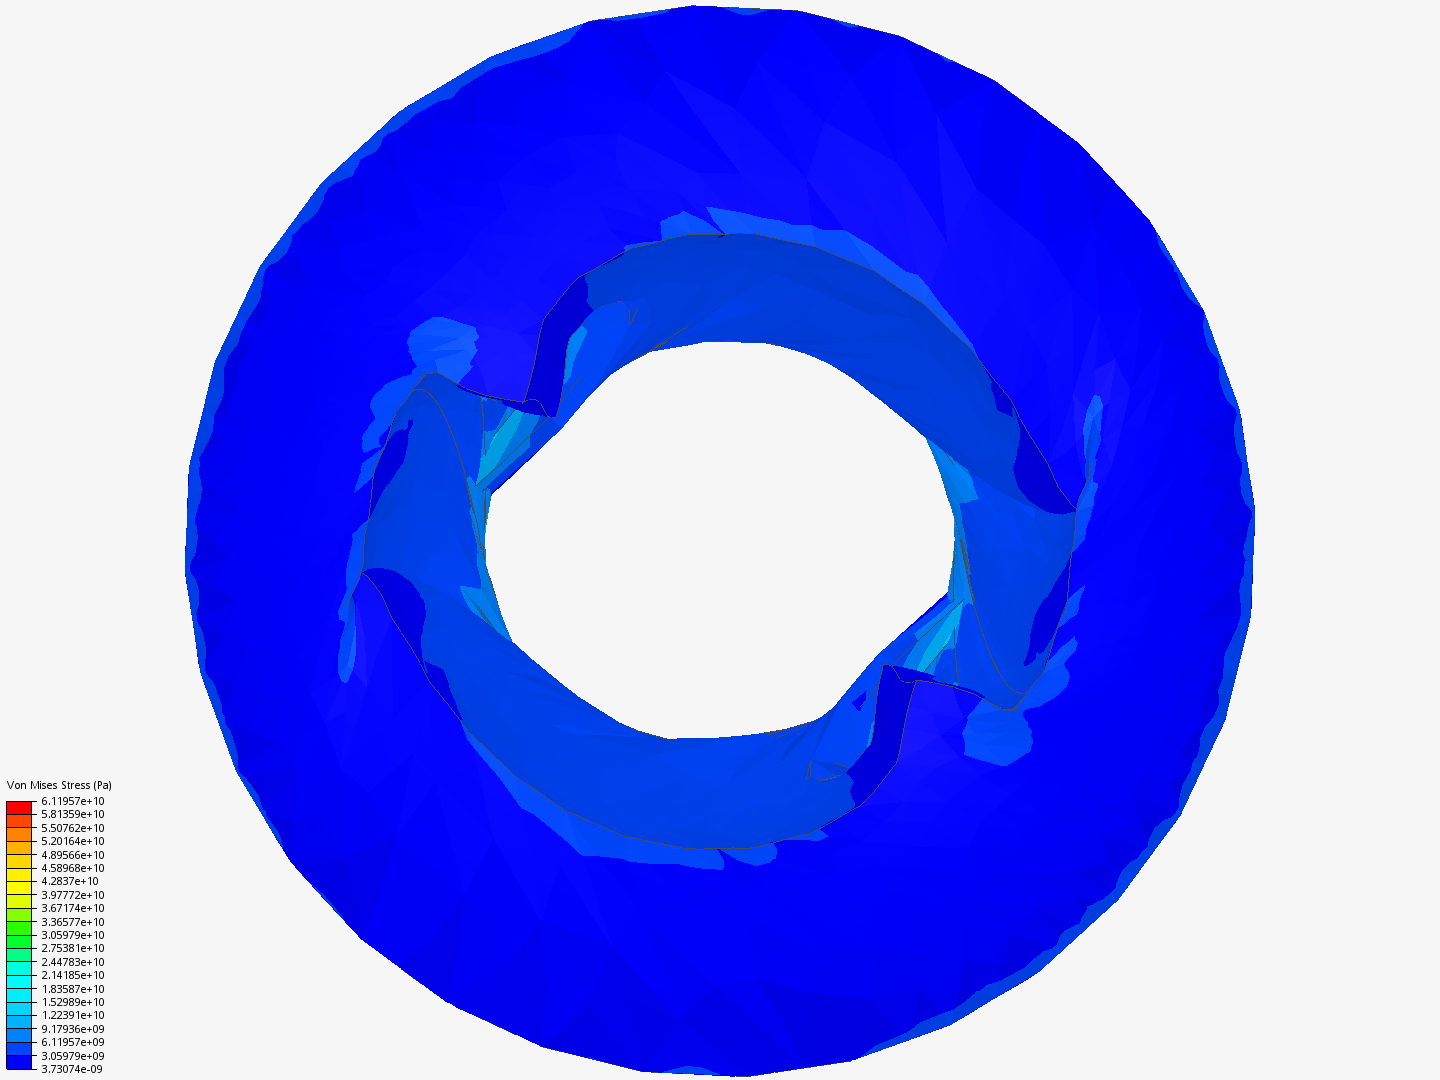 Beyblade contact ring stress test image